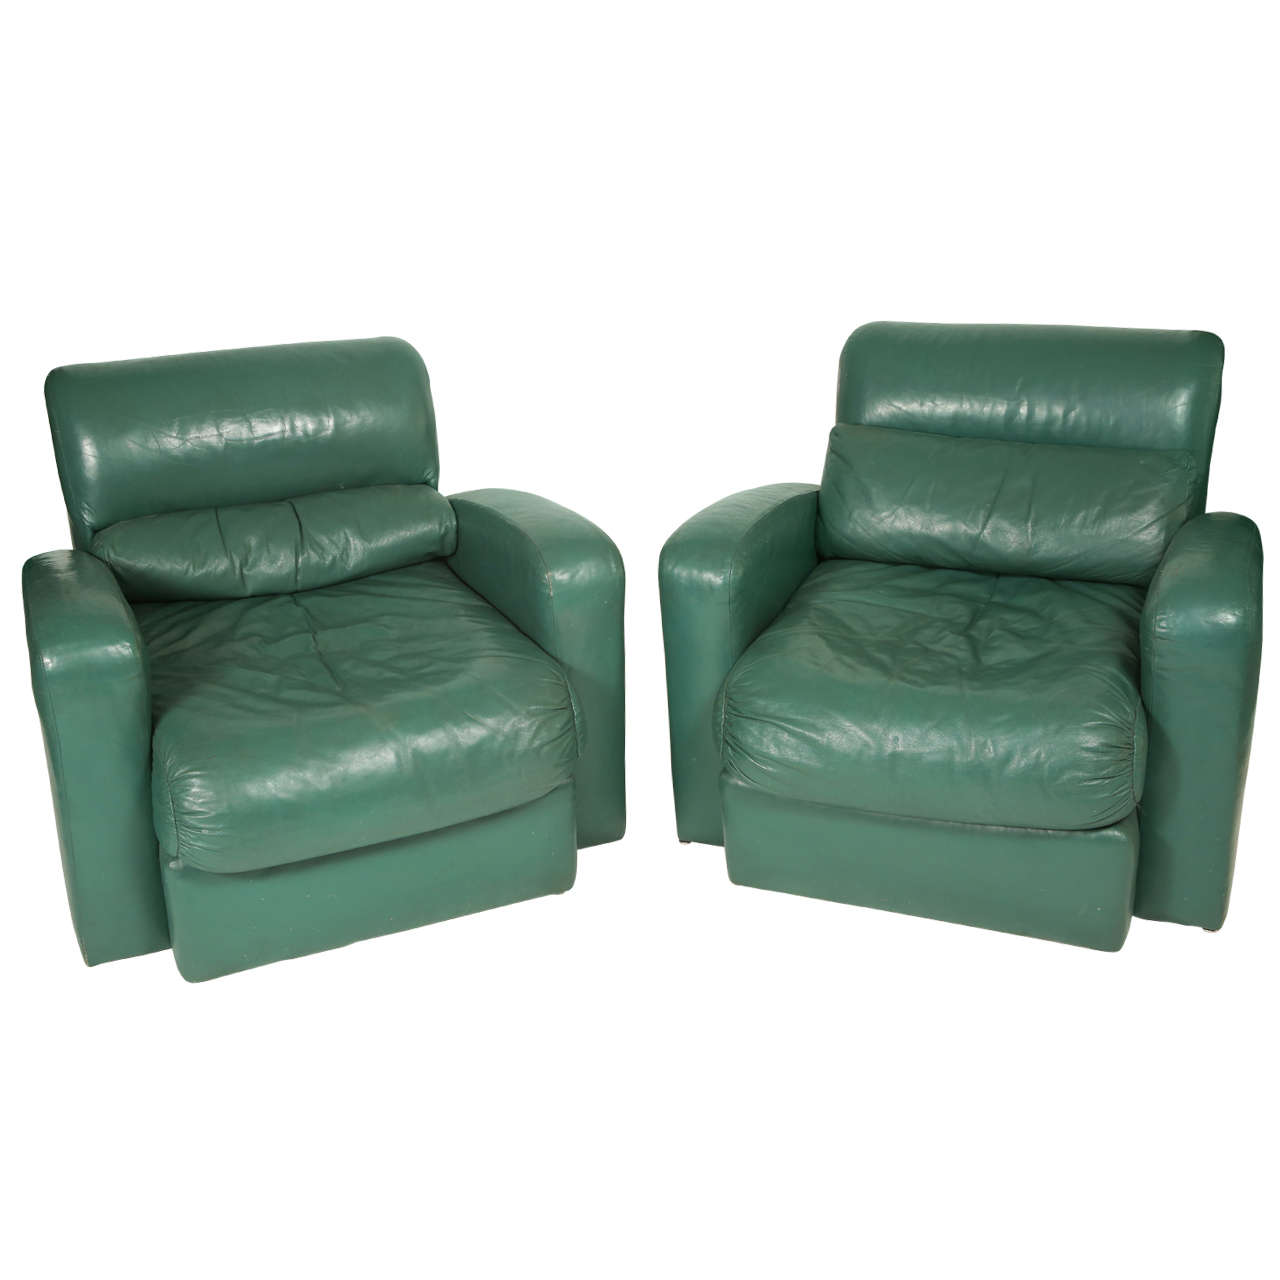 Pair of Club chairs by Jay Spectre